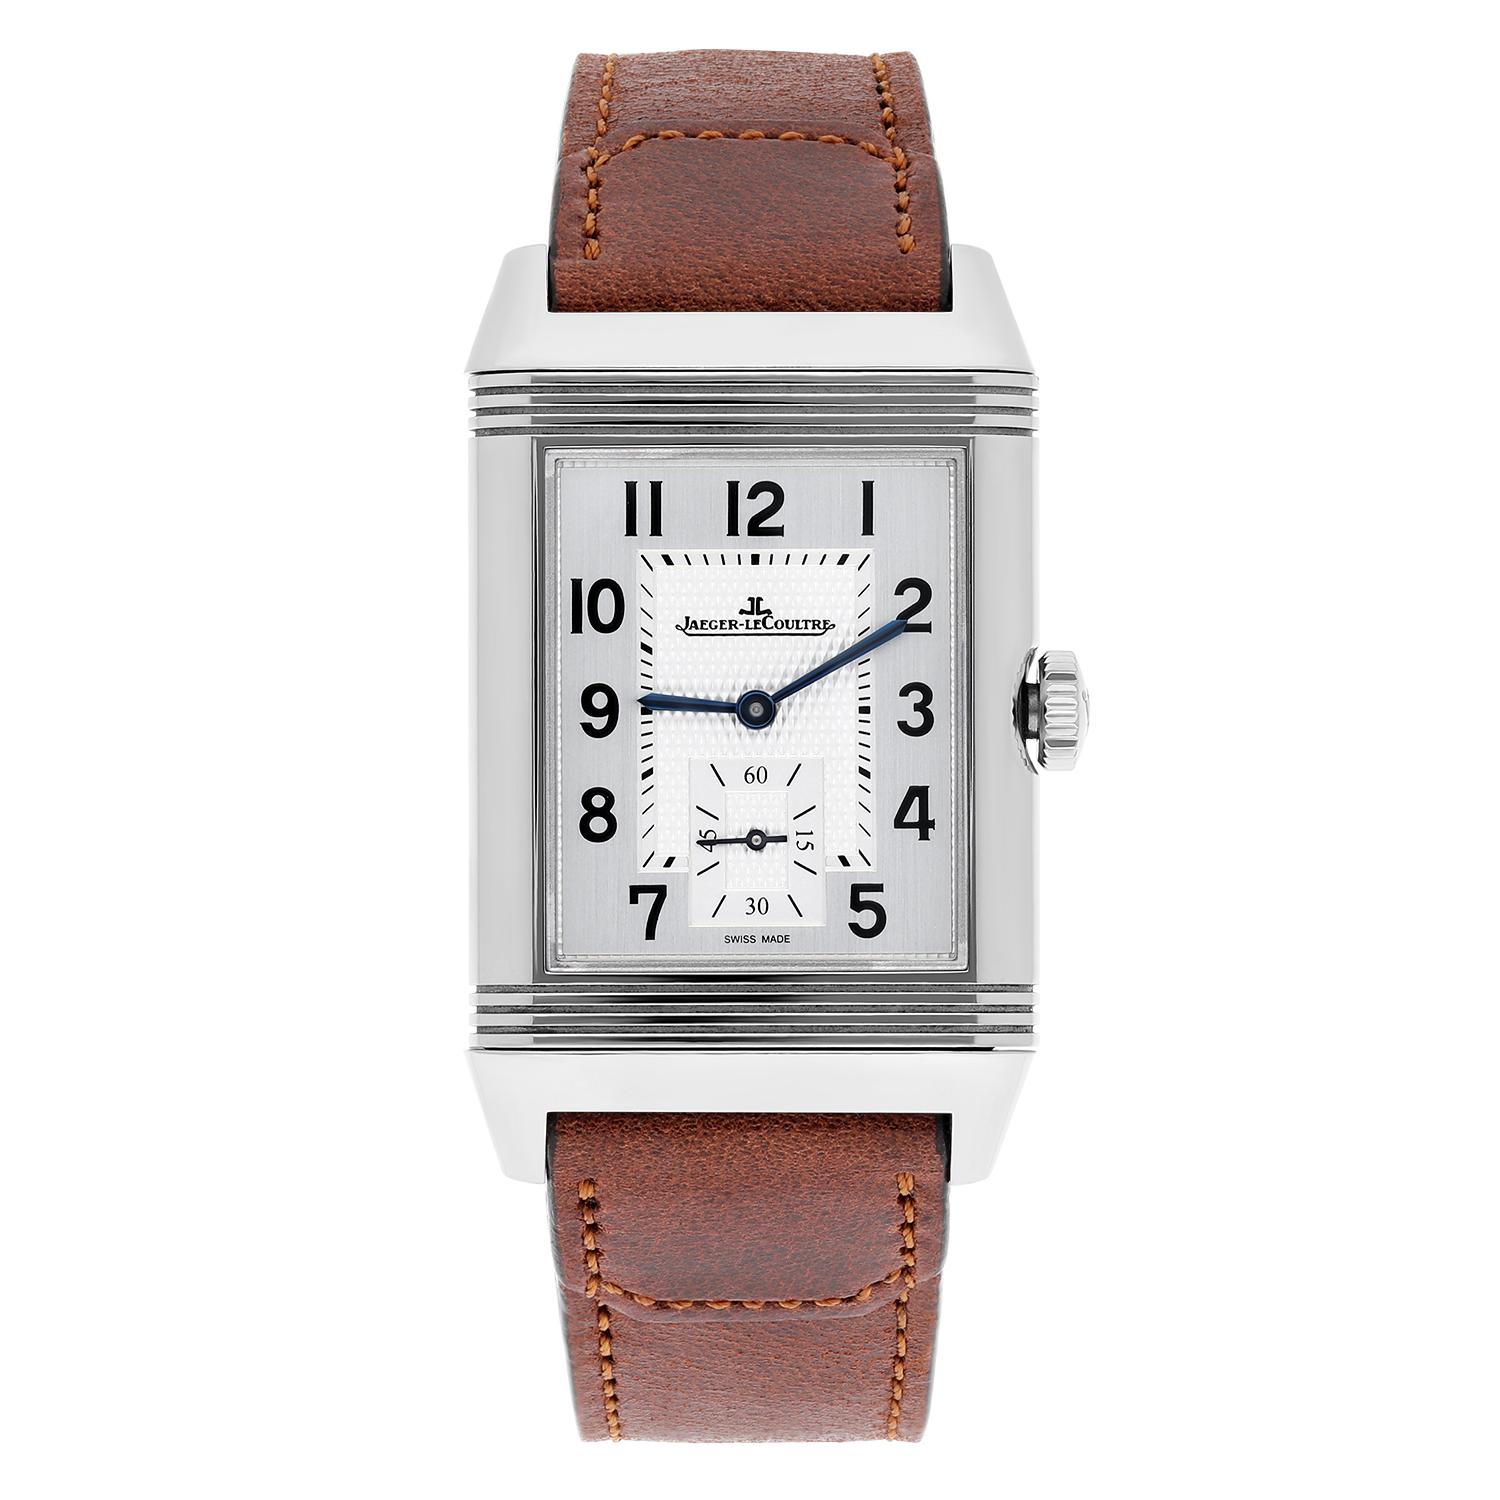 This example of the design, the Reverso Classic Large Duoface Small Seconds ref. Q3848422, is a particularly charming model launched by the brand in 2018 and currently serving as its current standard Duoface offering. Like other Reverso Duos (short